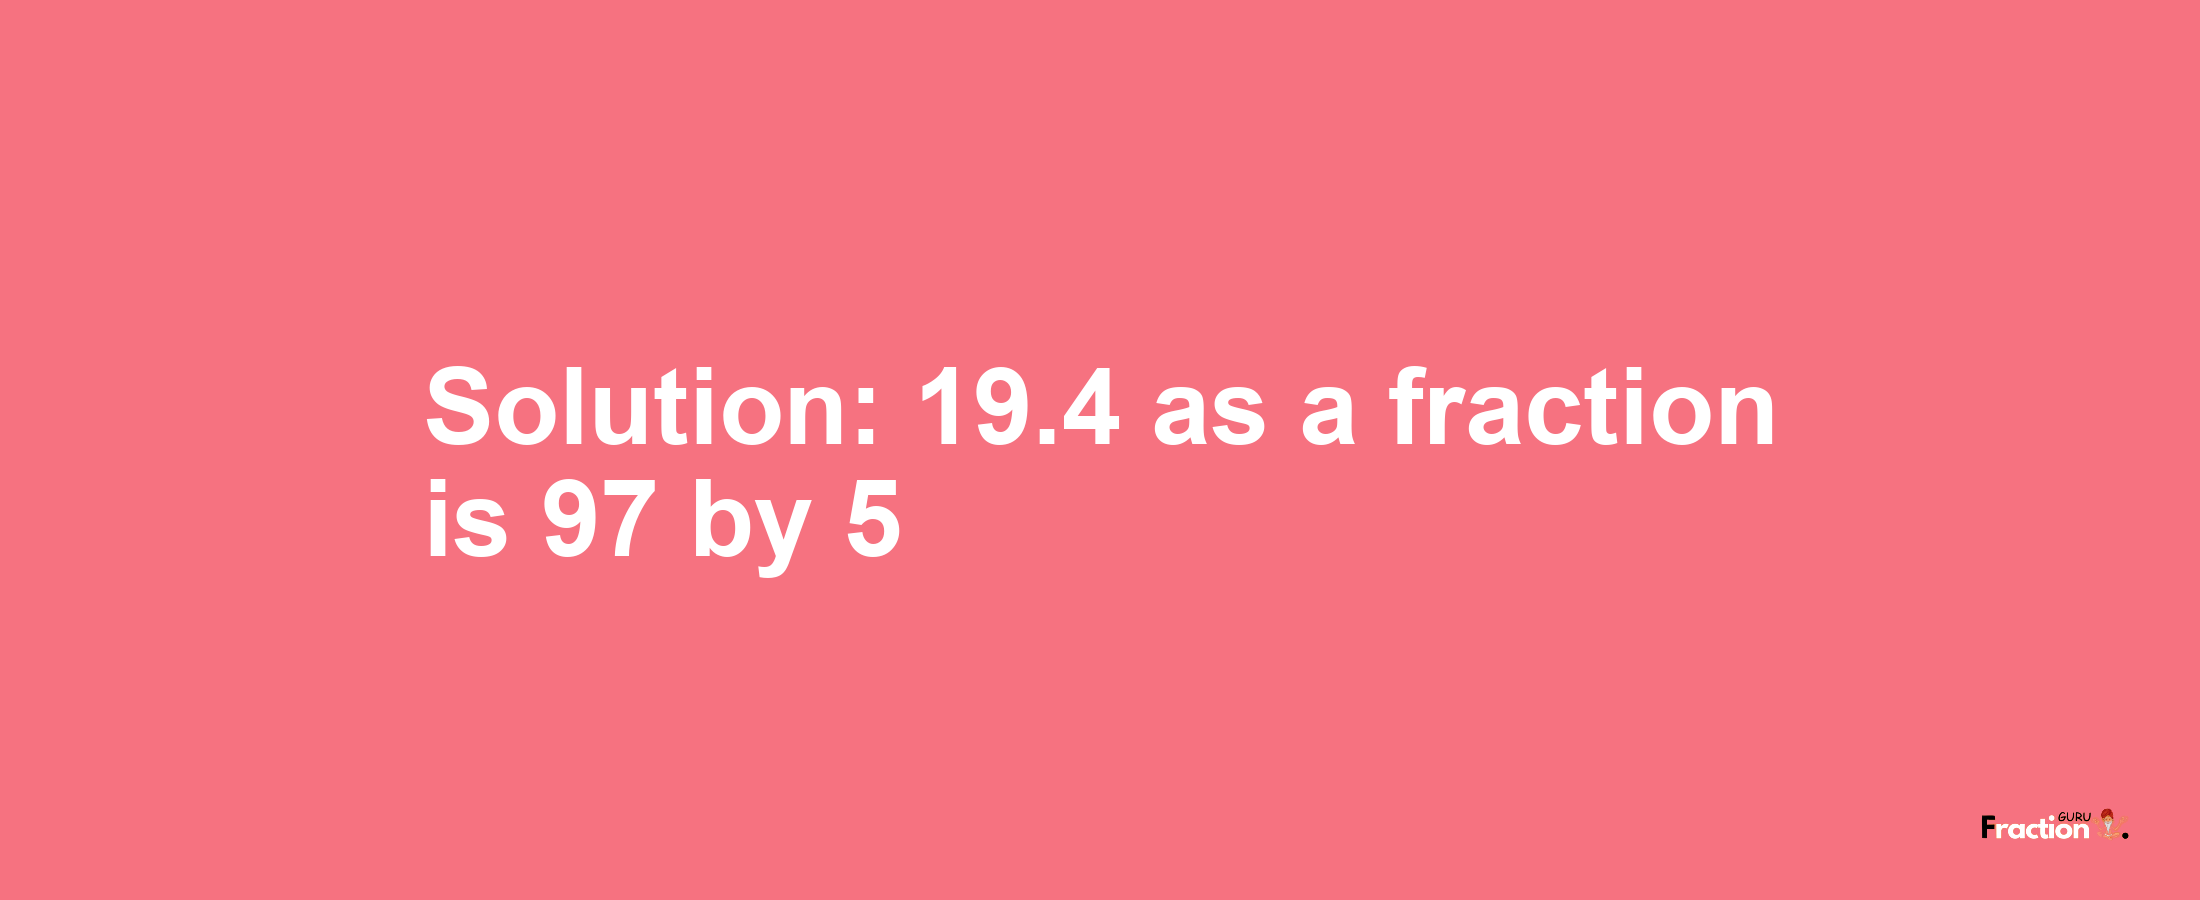 Solution:19.4 as a fraction is 97/5